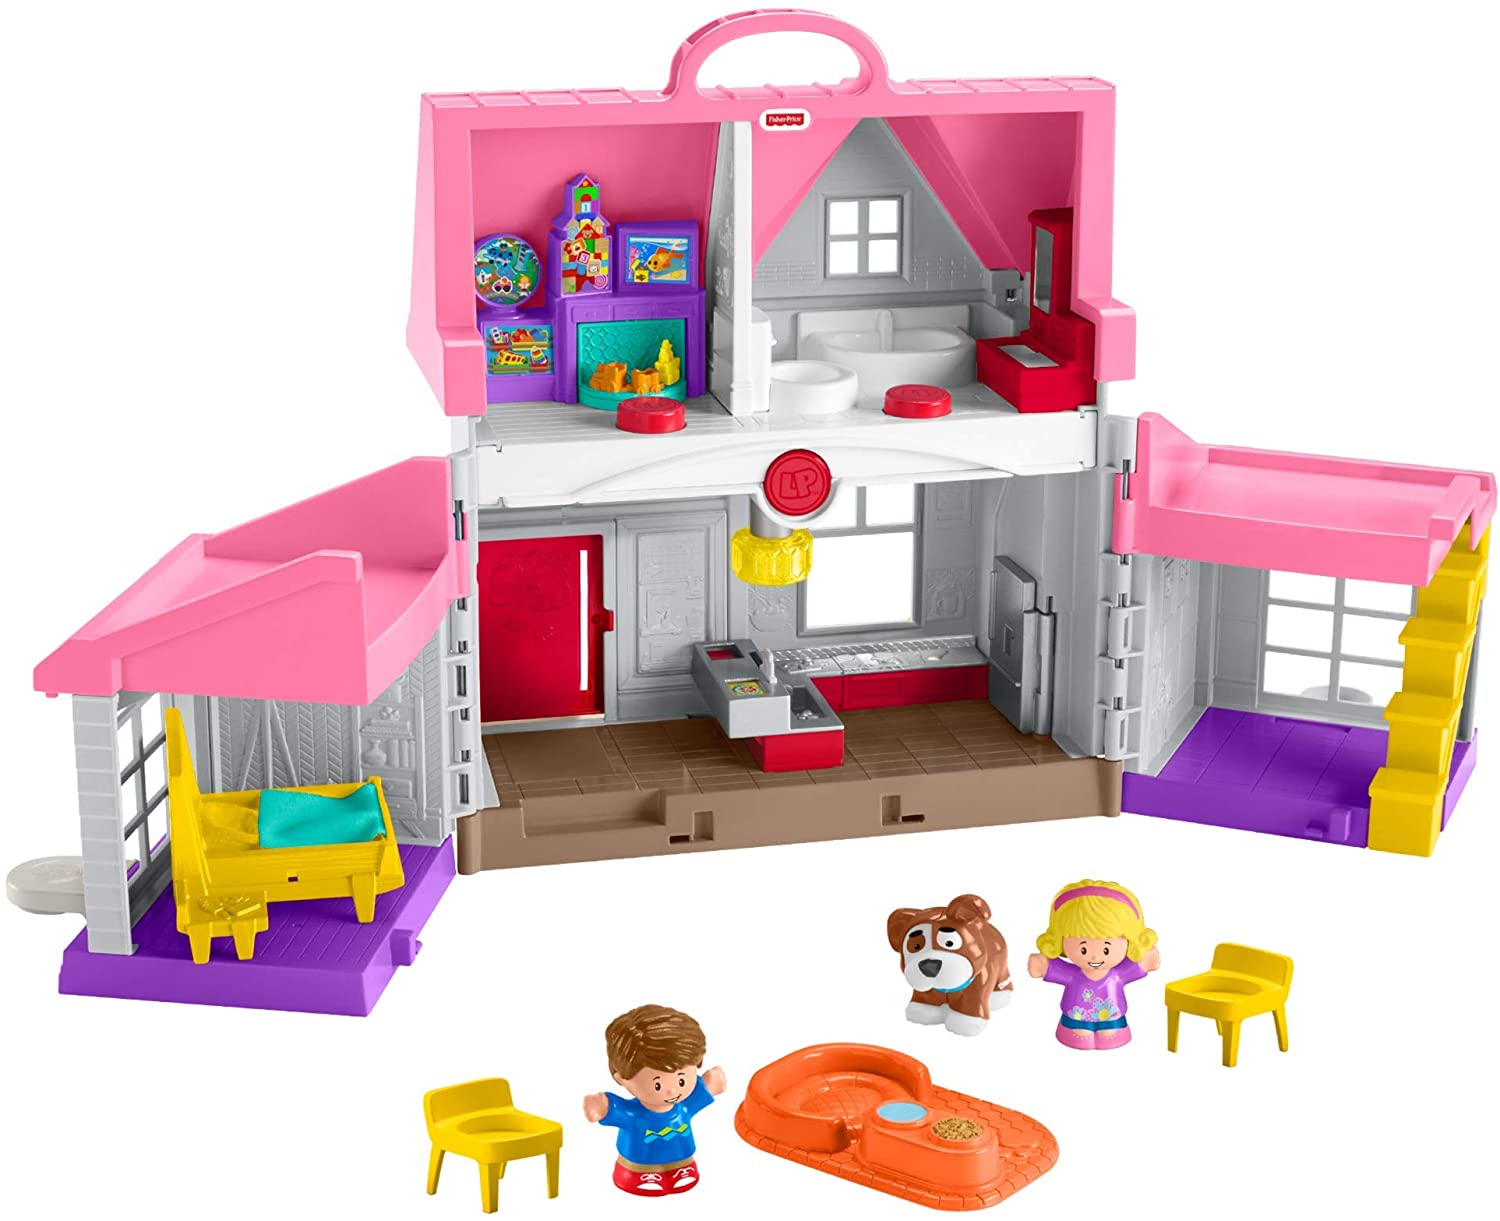 9 Best Fisher Price Dollhouse Reviews of 2022 1